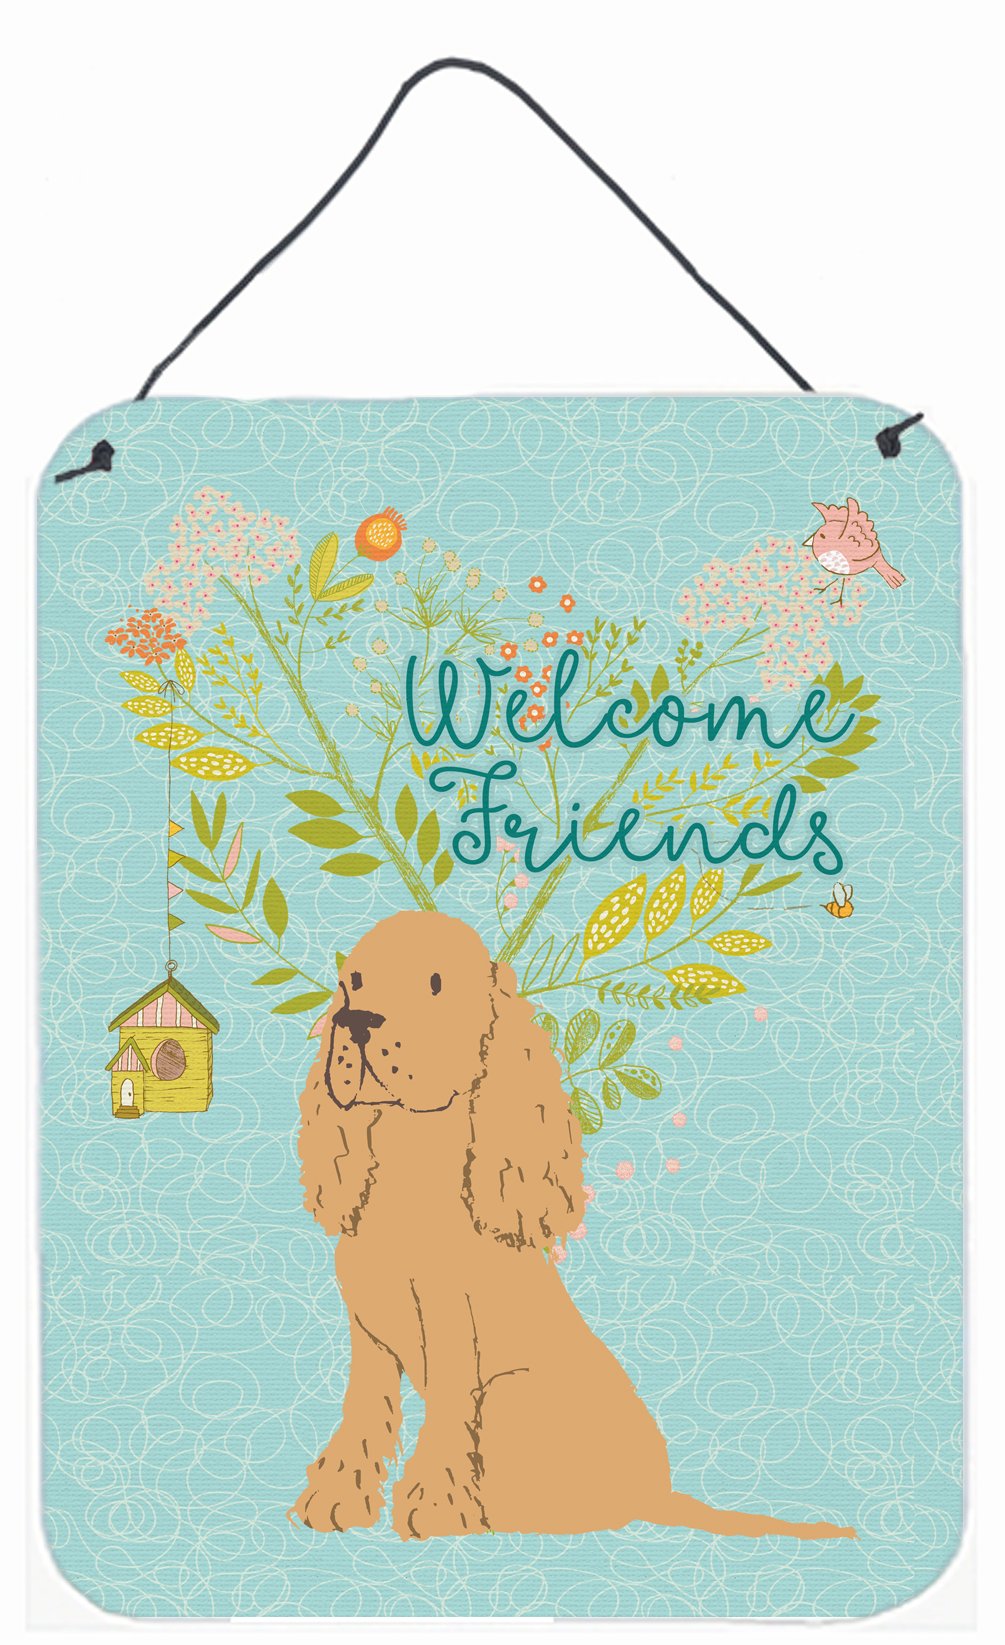 Welcome Friends Buff Cocker Spaniel Wall or Door Hanging Prints BB7619DS1216 by Caroline's Treasures